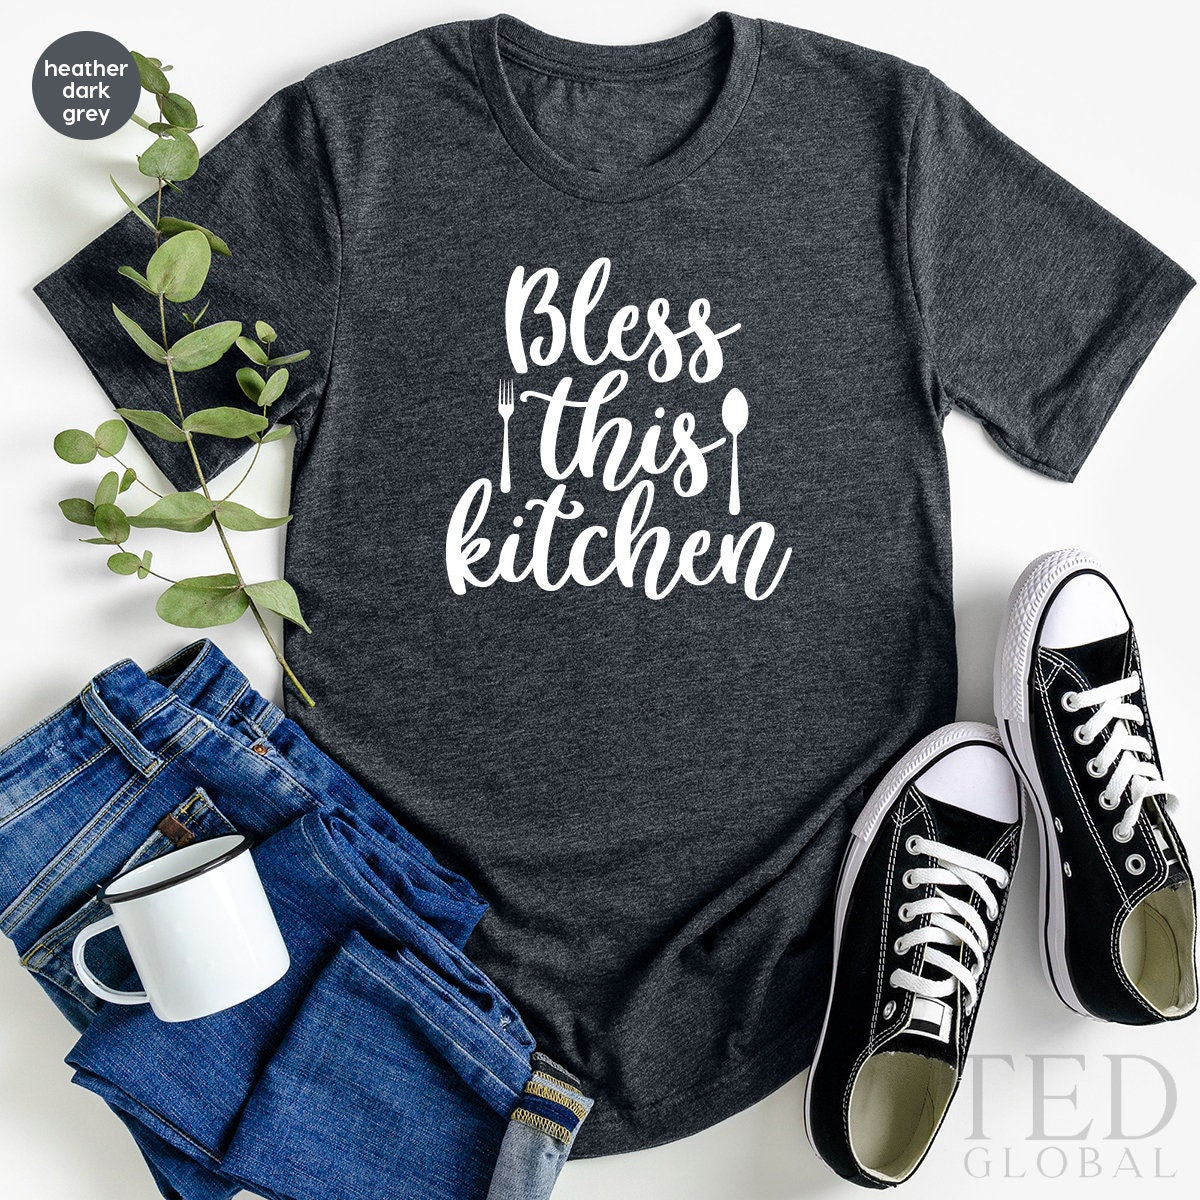 Just a Girl Who Loves to Cook Shirt, Cookingshirt, Baking T-shirt, Chef  Shirts, Baking Gifts, Cooking Gifts for Her, Kitchen Gifts 